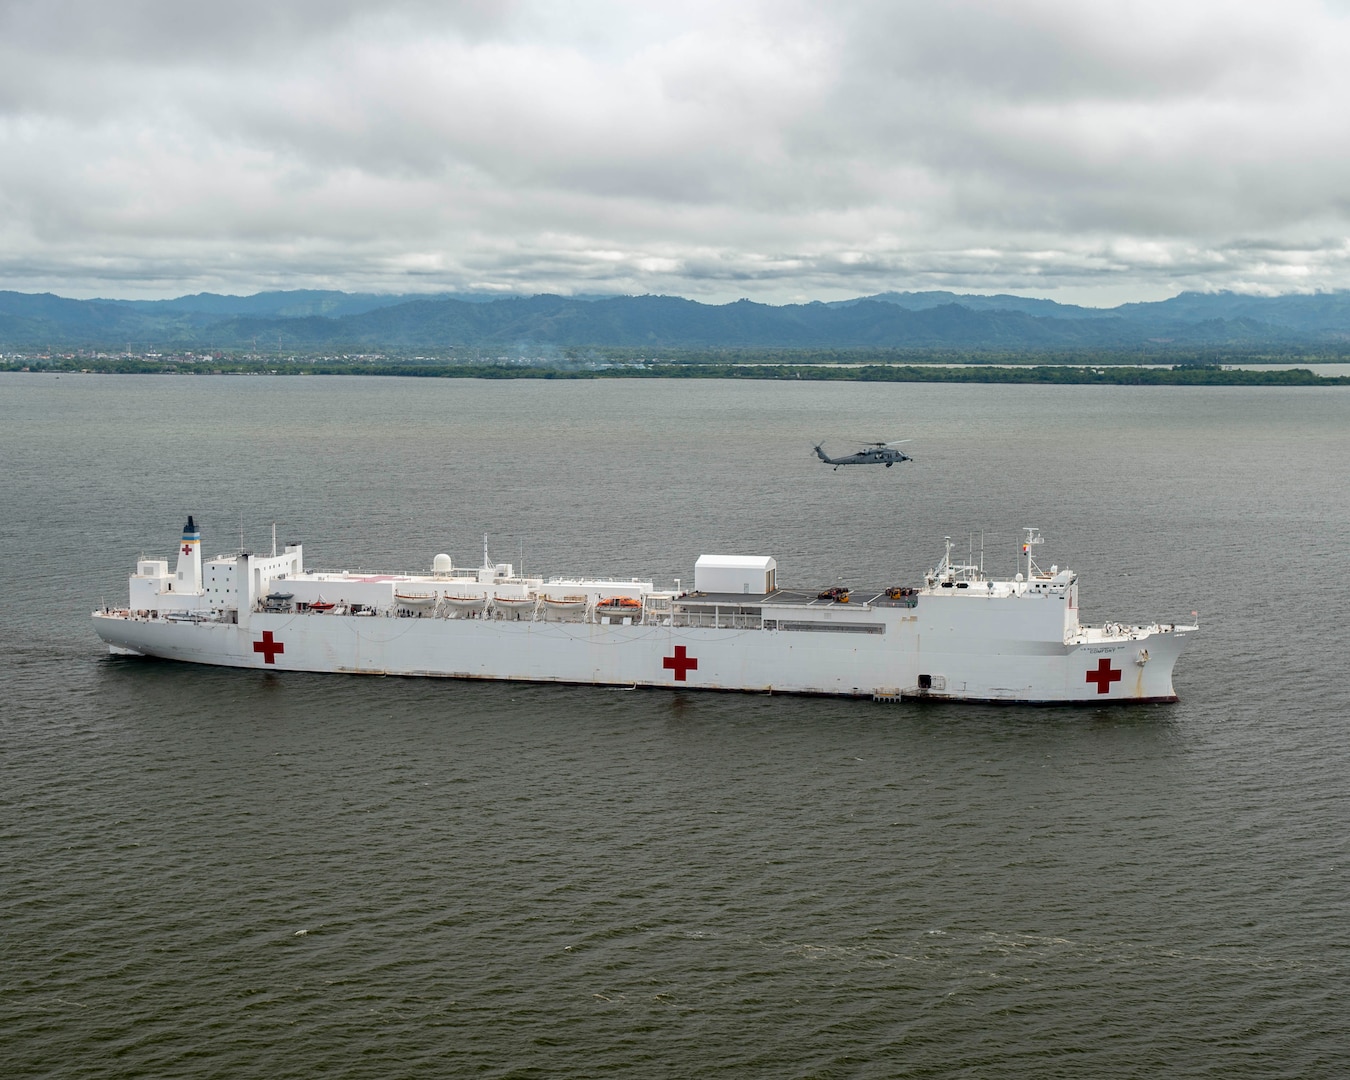 The hospital ship USNS Comfort (T-AH 20) anchors off the coast of Colombia.